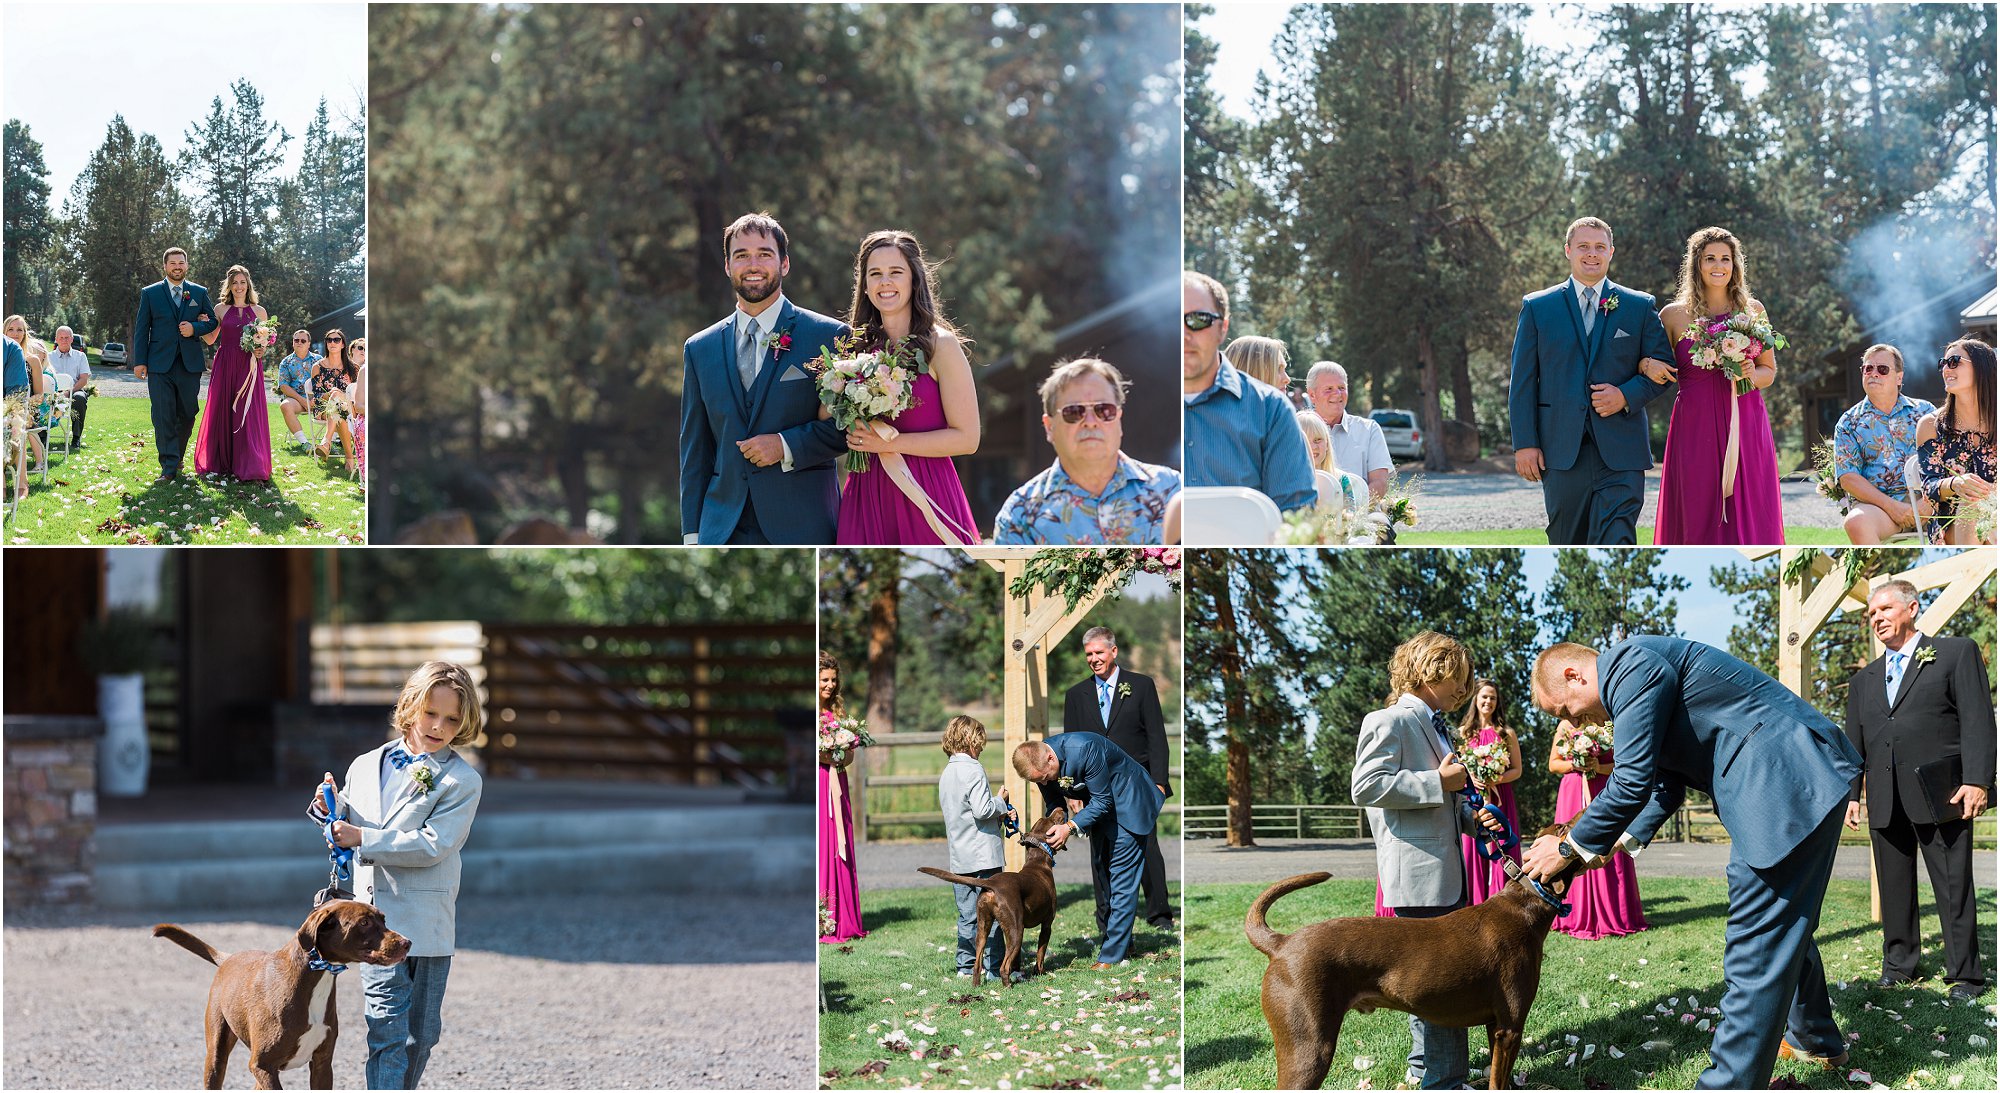 The Dog serves as a ring bearer at this gorgeous rustic outdoor ceremony at the Rock Springs Ranch wedding venue in Bend, OR. | Erica Swantek Photography